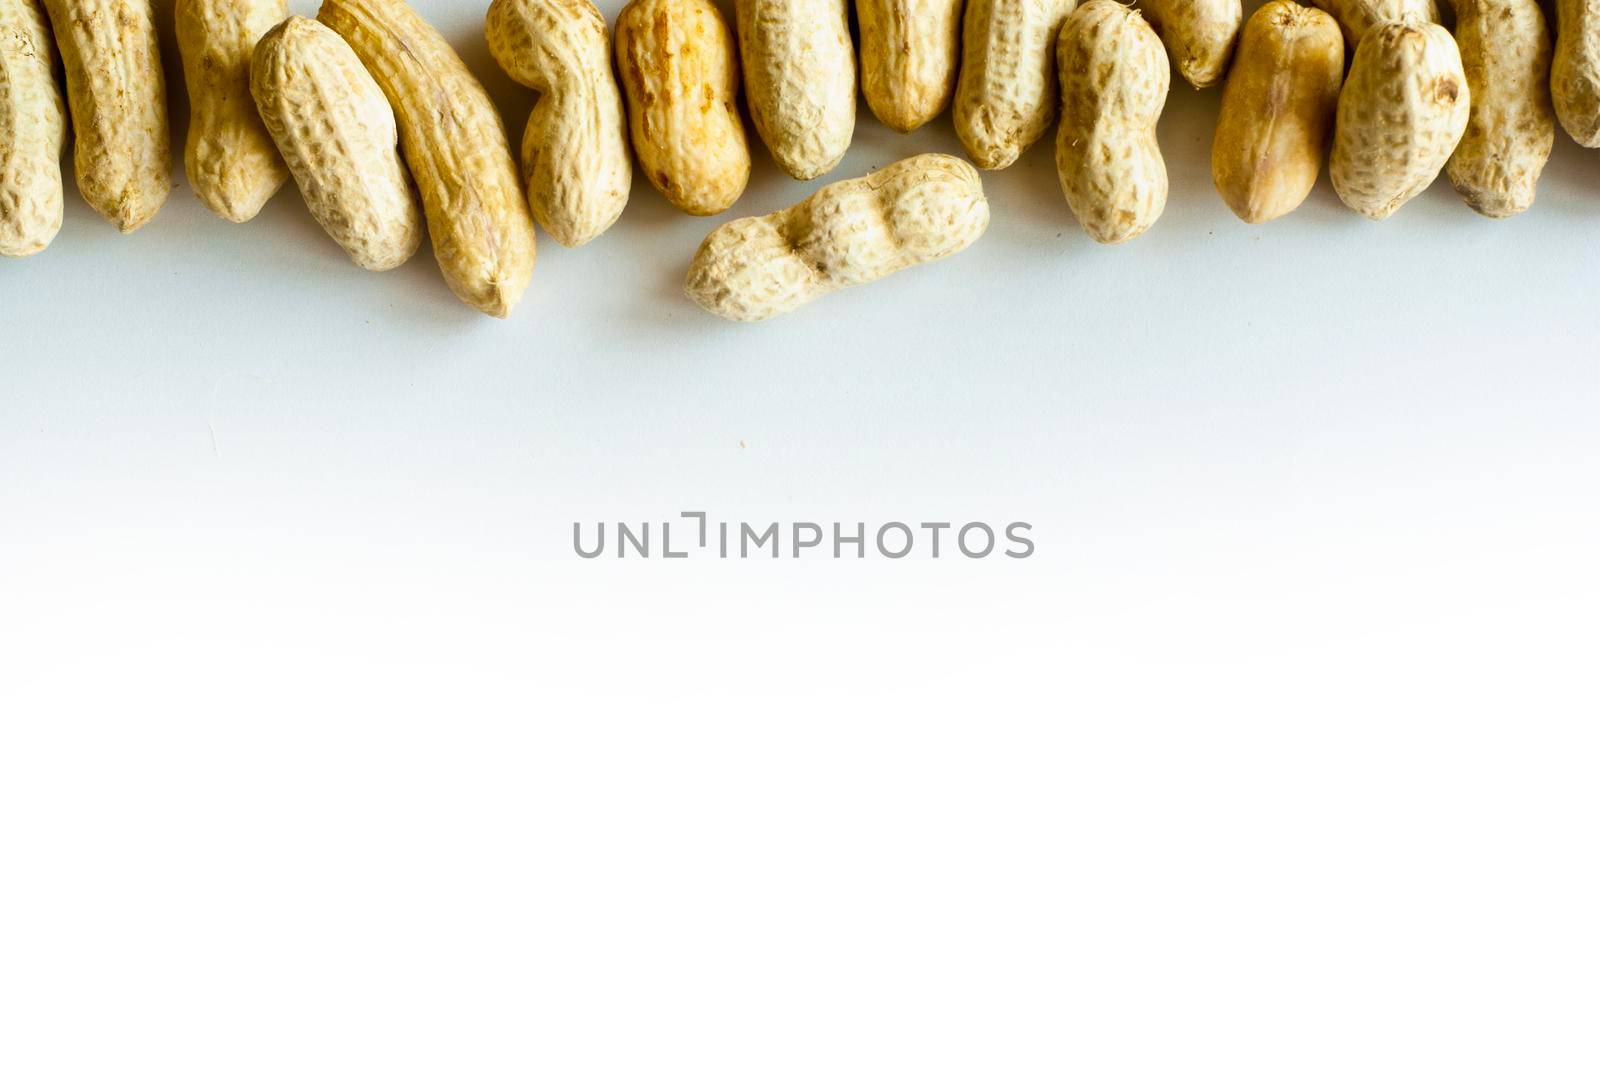 Copy space and the boiled peanuts by Satakorn